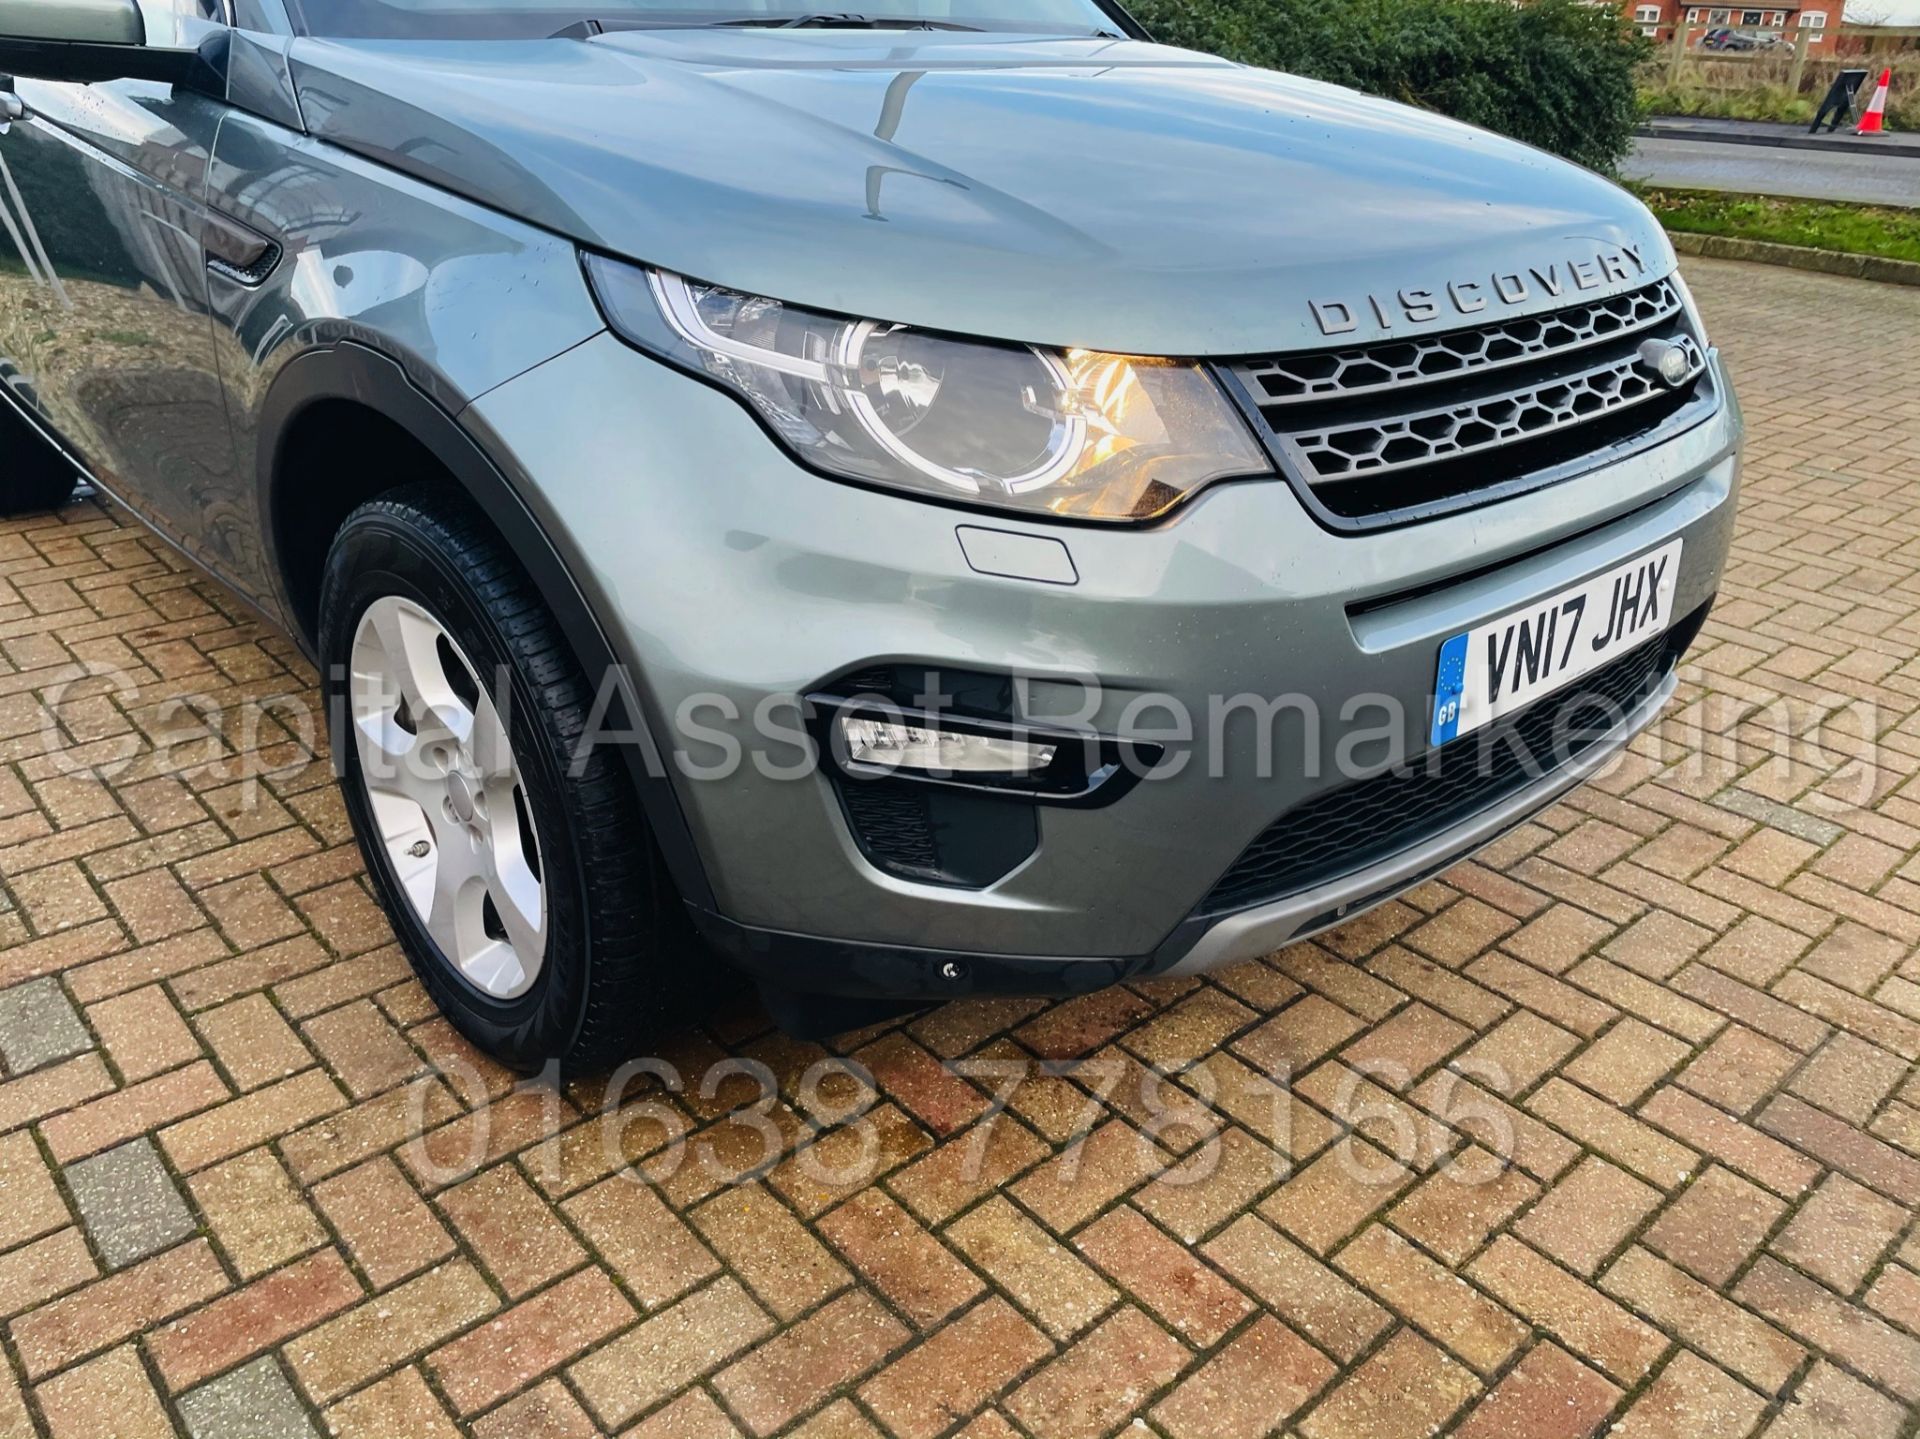 (On Sale) LAND ROVER DISCOVERY SPORT *SE TECH* SUV (2017) '2.0 TD4 - STOP/START' (1 OWNER FROM NEW) - Image 15 of 50